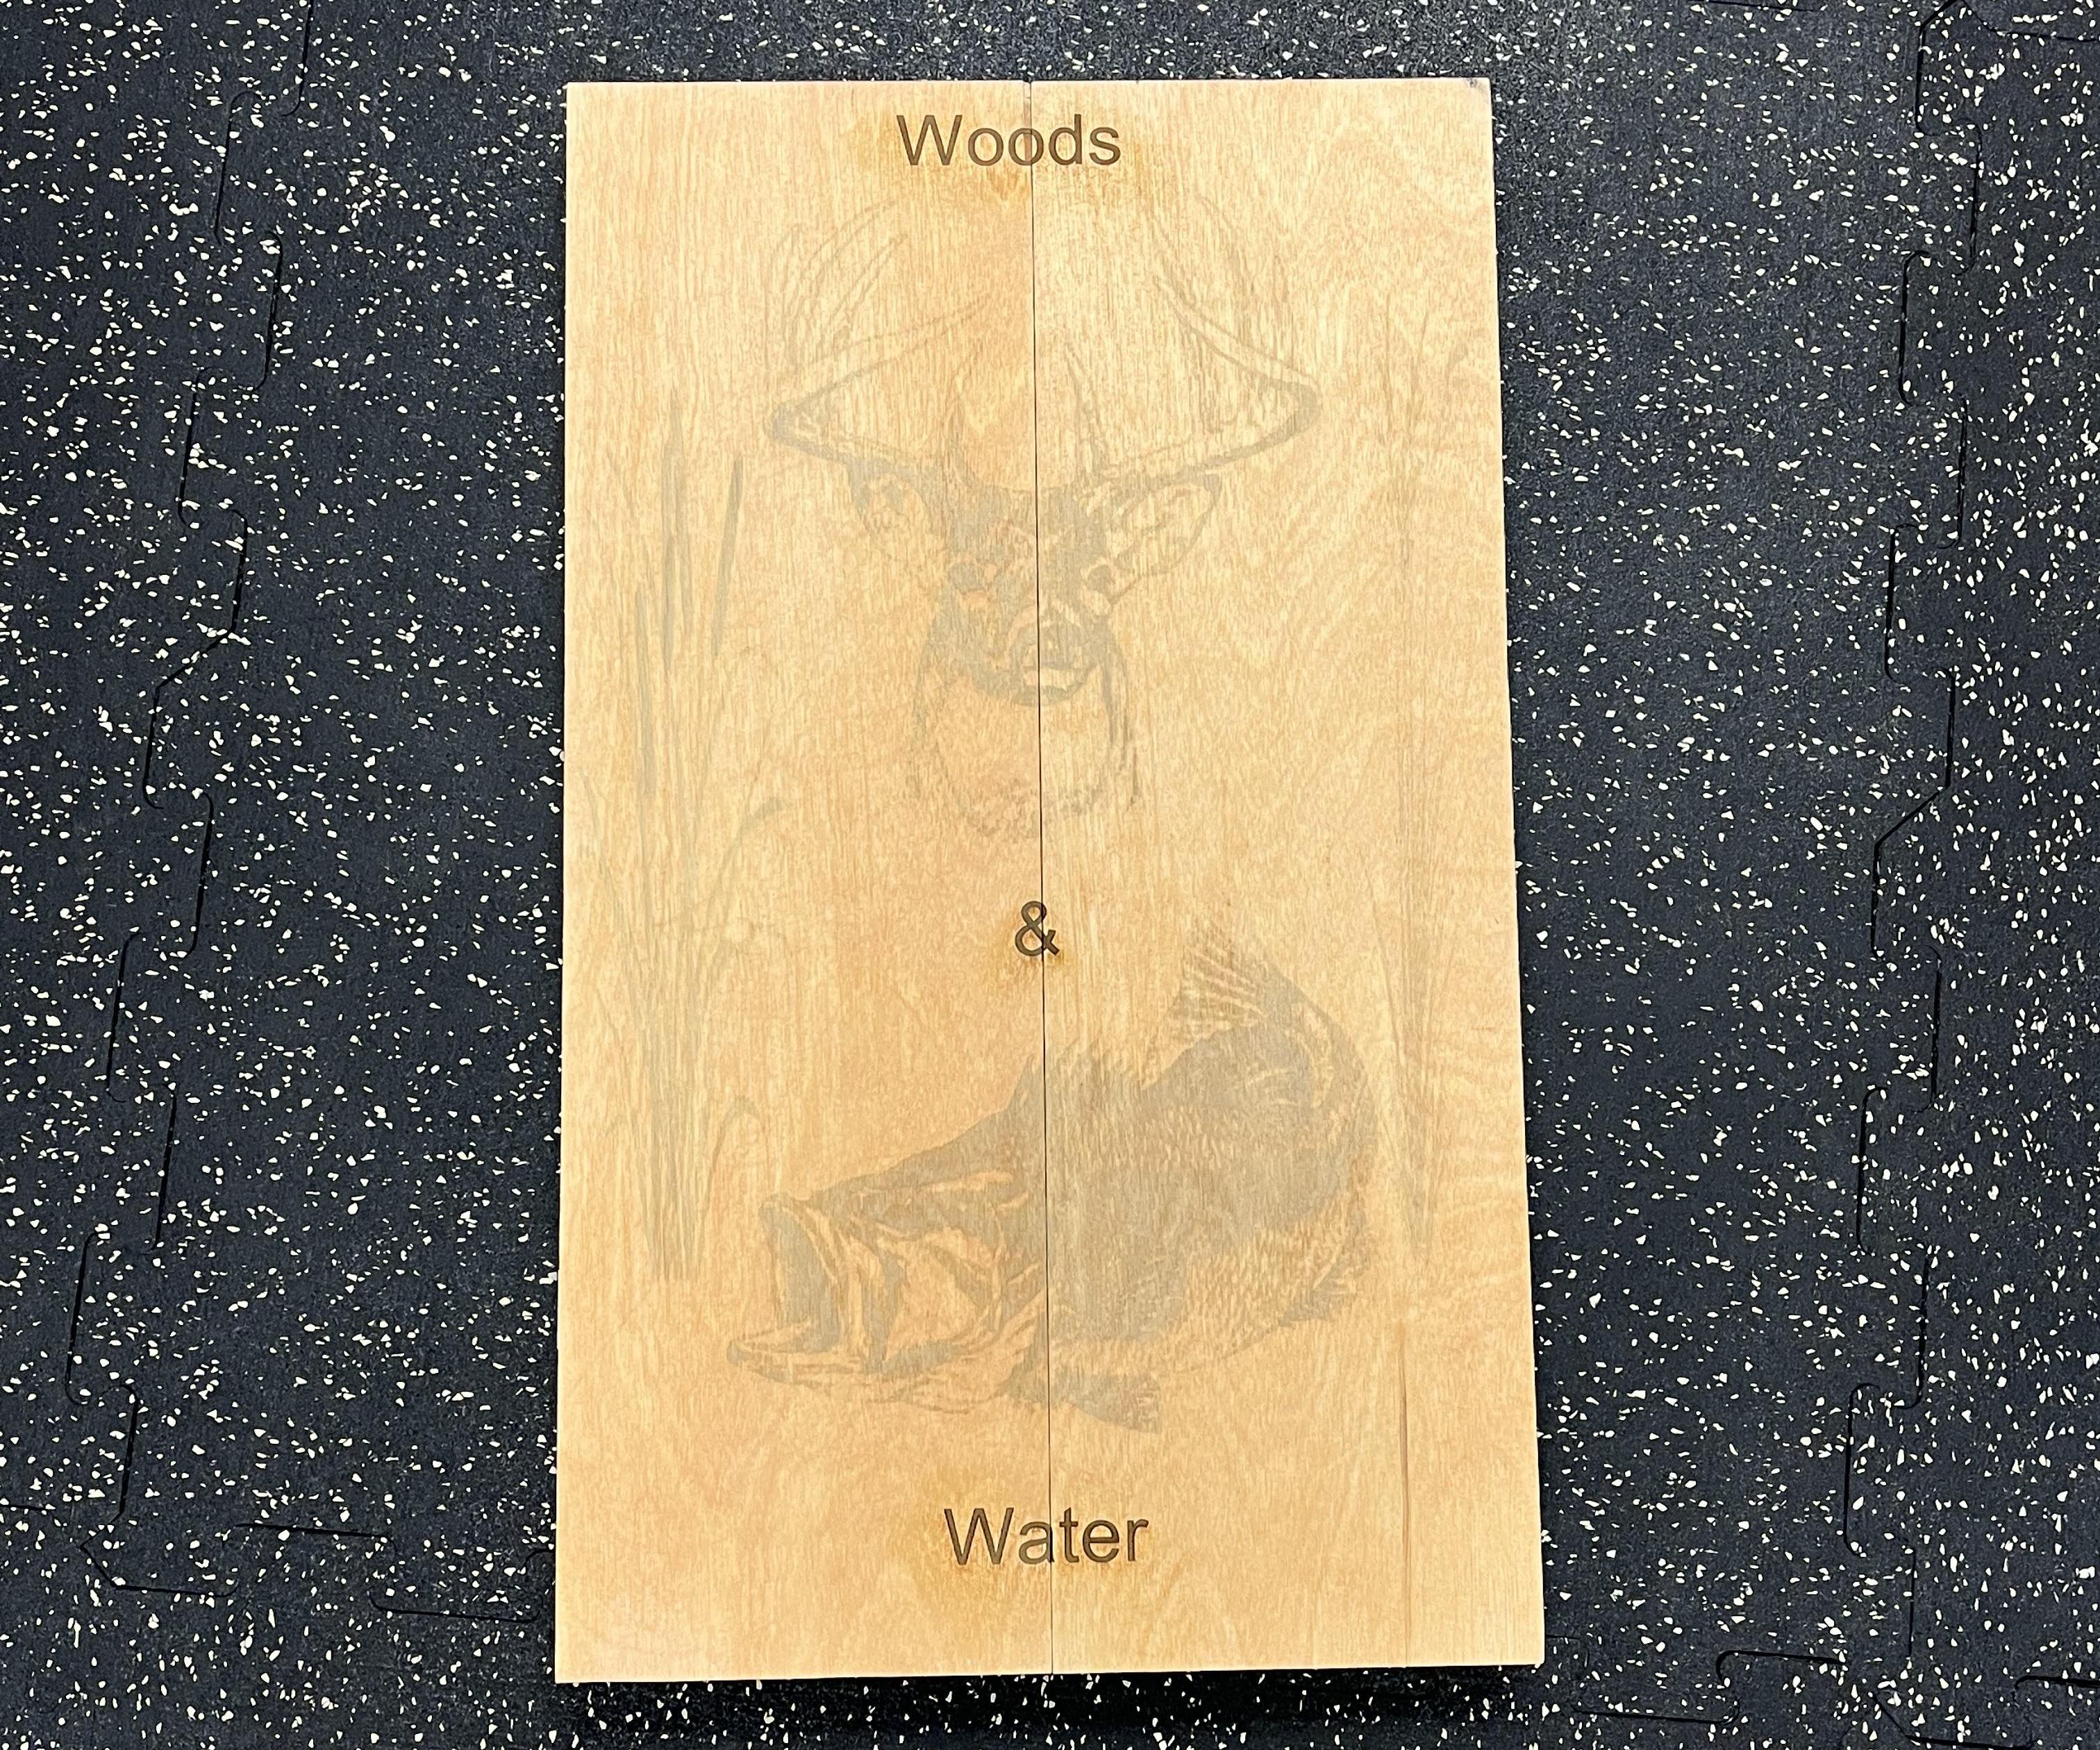 Making the Board Game Woods and Water in Fusion 360